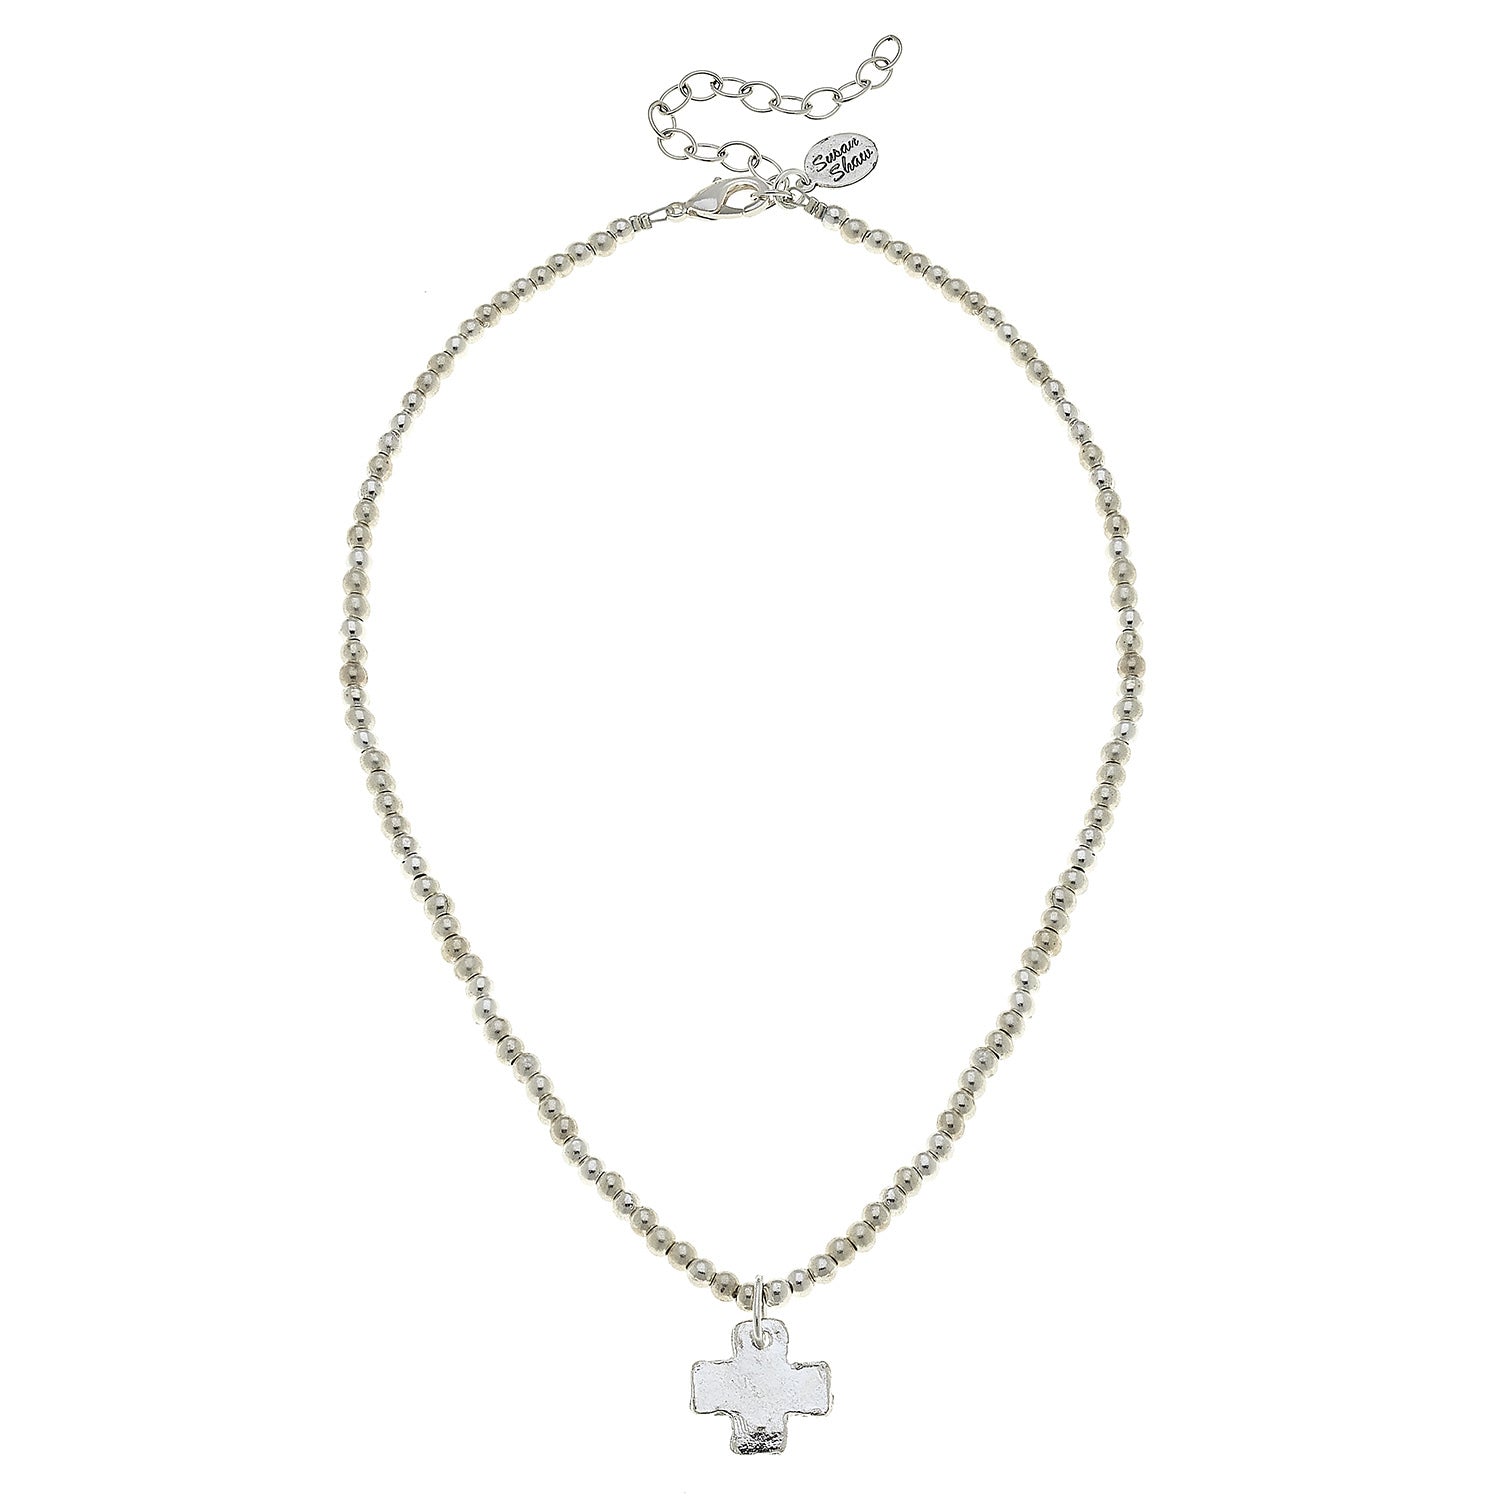 Susan Shaw Jewelry Cross Necklace, Silver Beads with Cross Pendant in Silver